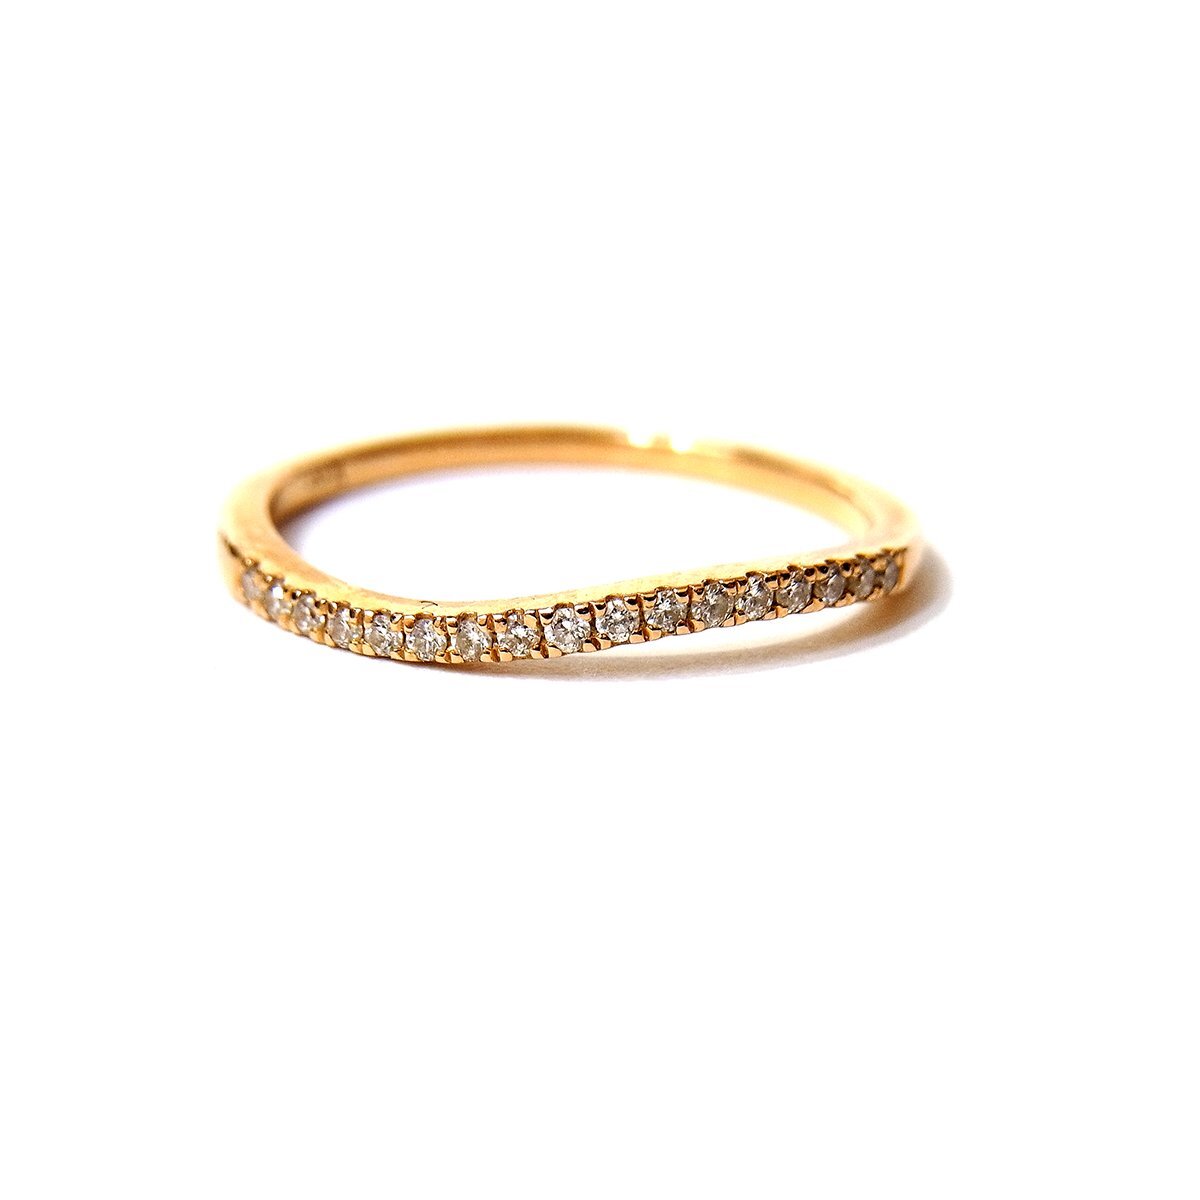  beautiful goods Vendome Aoyama K18te The Yinling g pin key ring ring diamond simple pink gold approximately 5 number gross weight approximately 0.9g ultrasound washing ending =